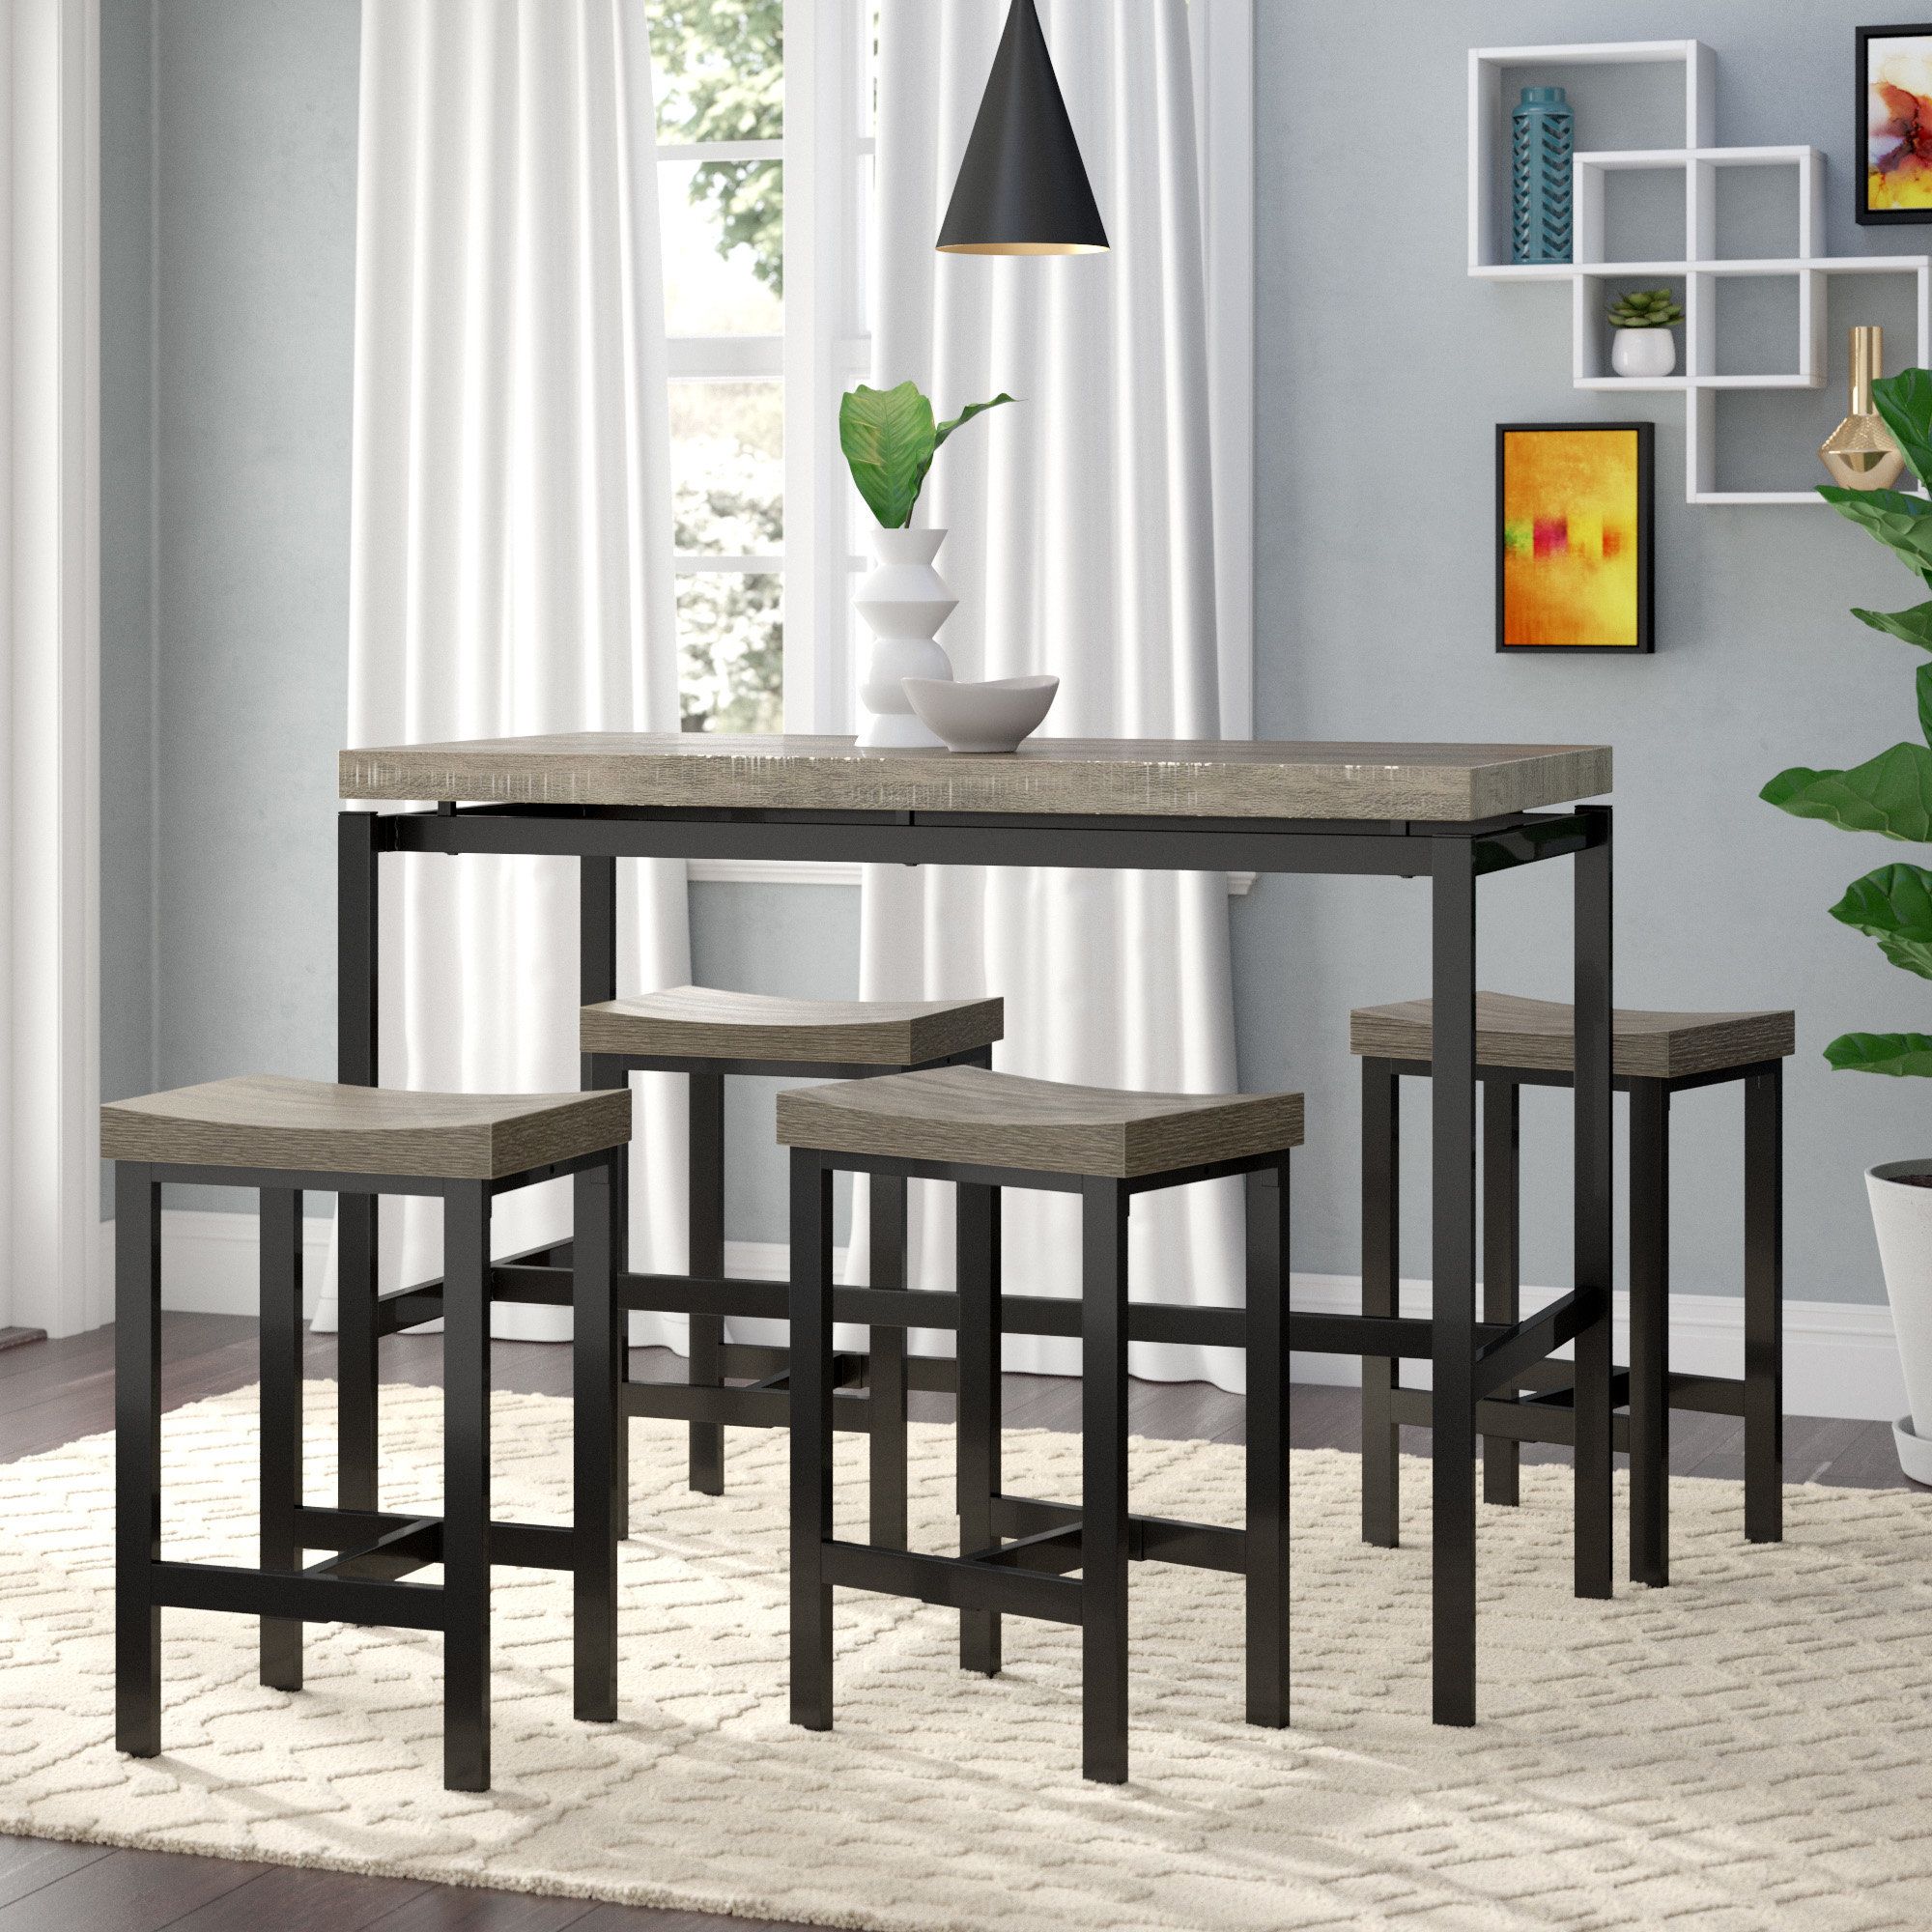 Beveridge 5 Piece Dining Set Throughout Most Popular Bryson 5 Piece Dining Sets (View 8 of 20)